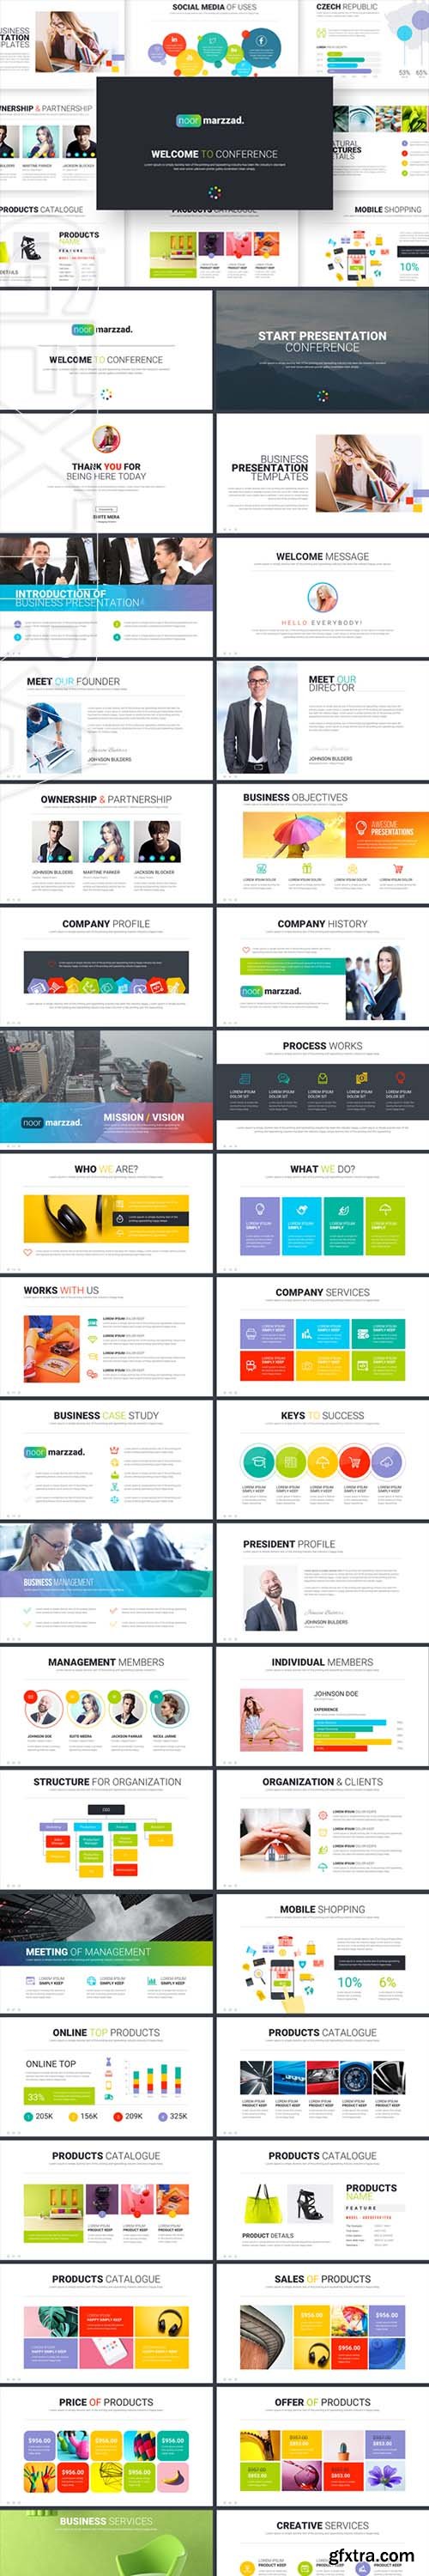 GraphicRiver - Business Powerpoint Presentation 22380681